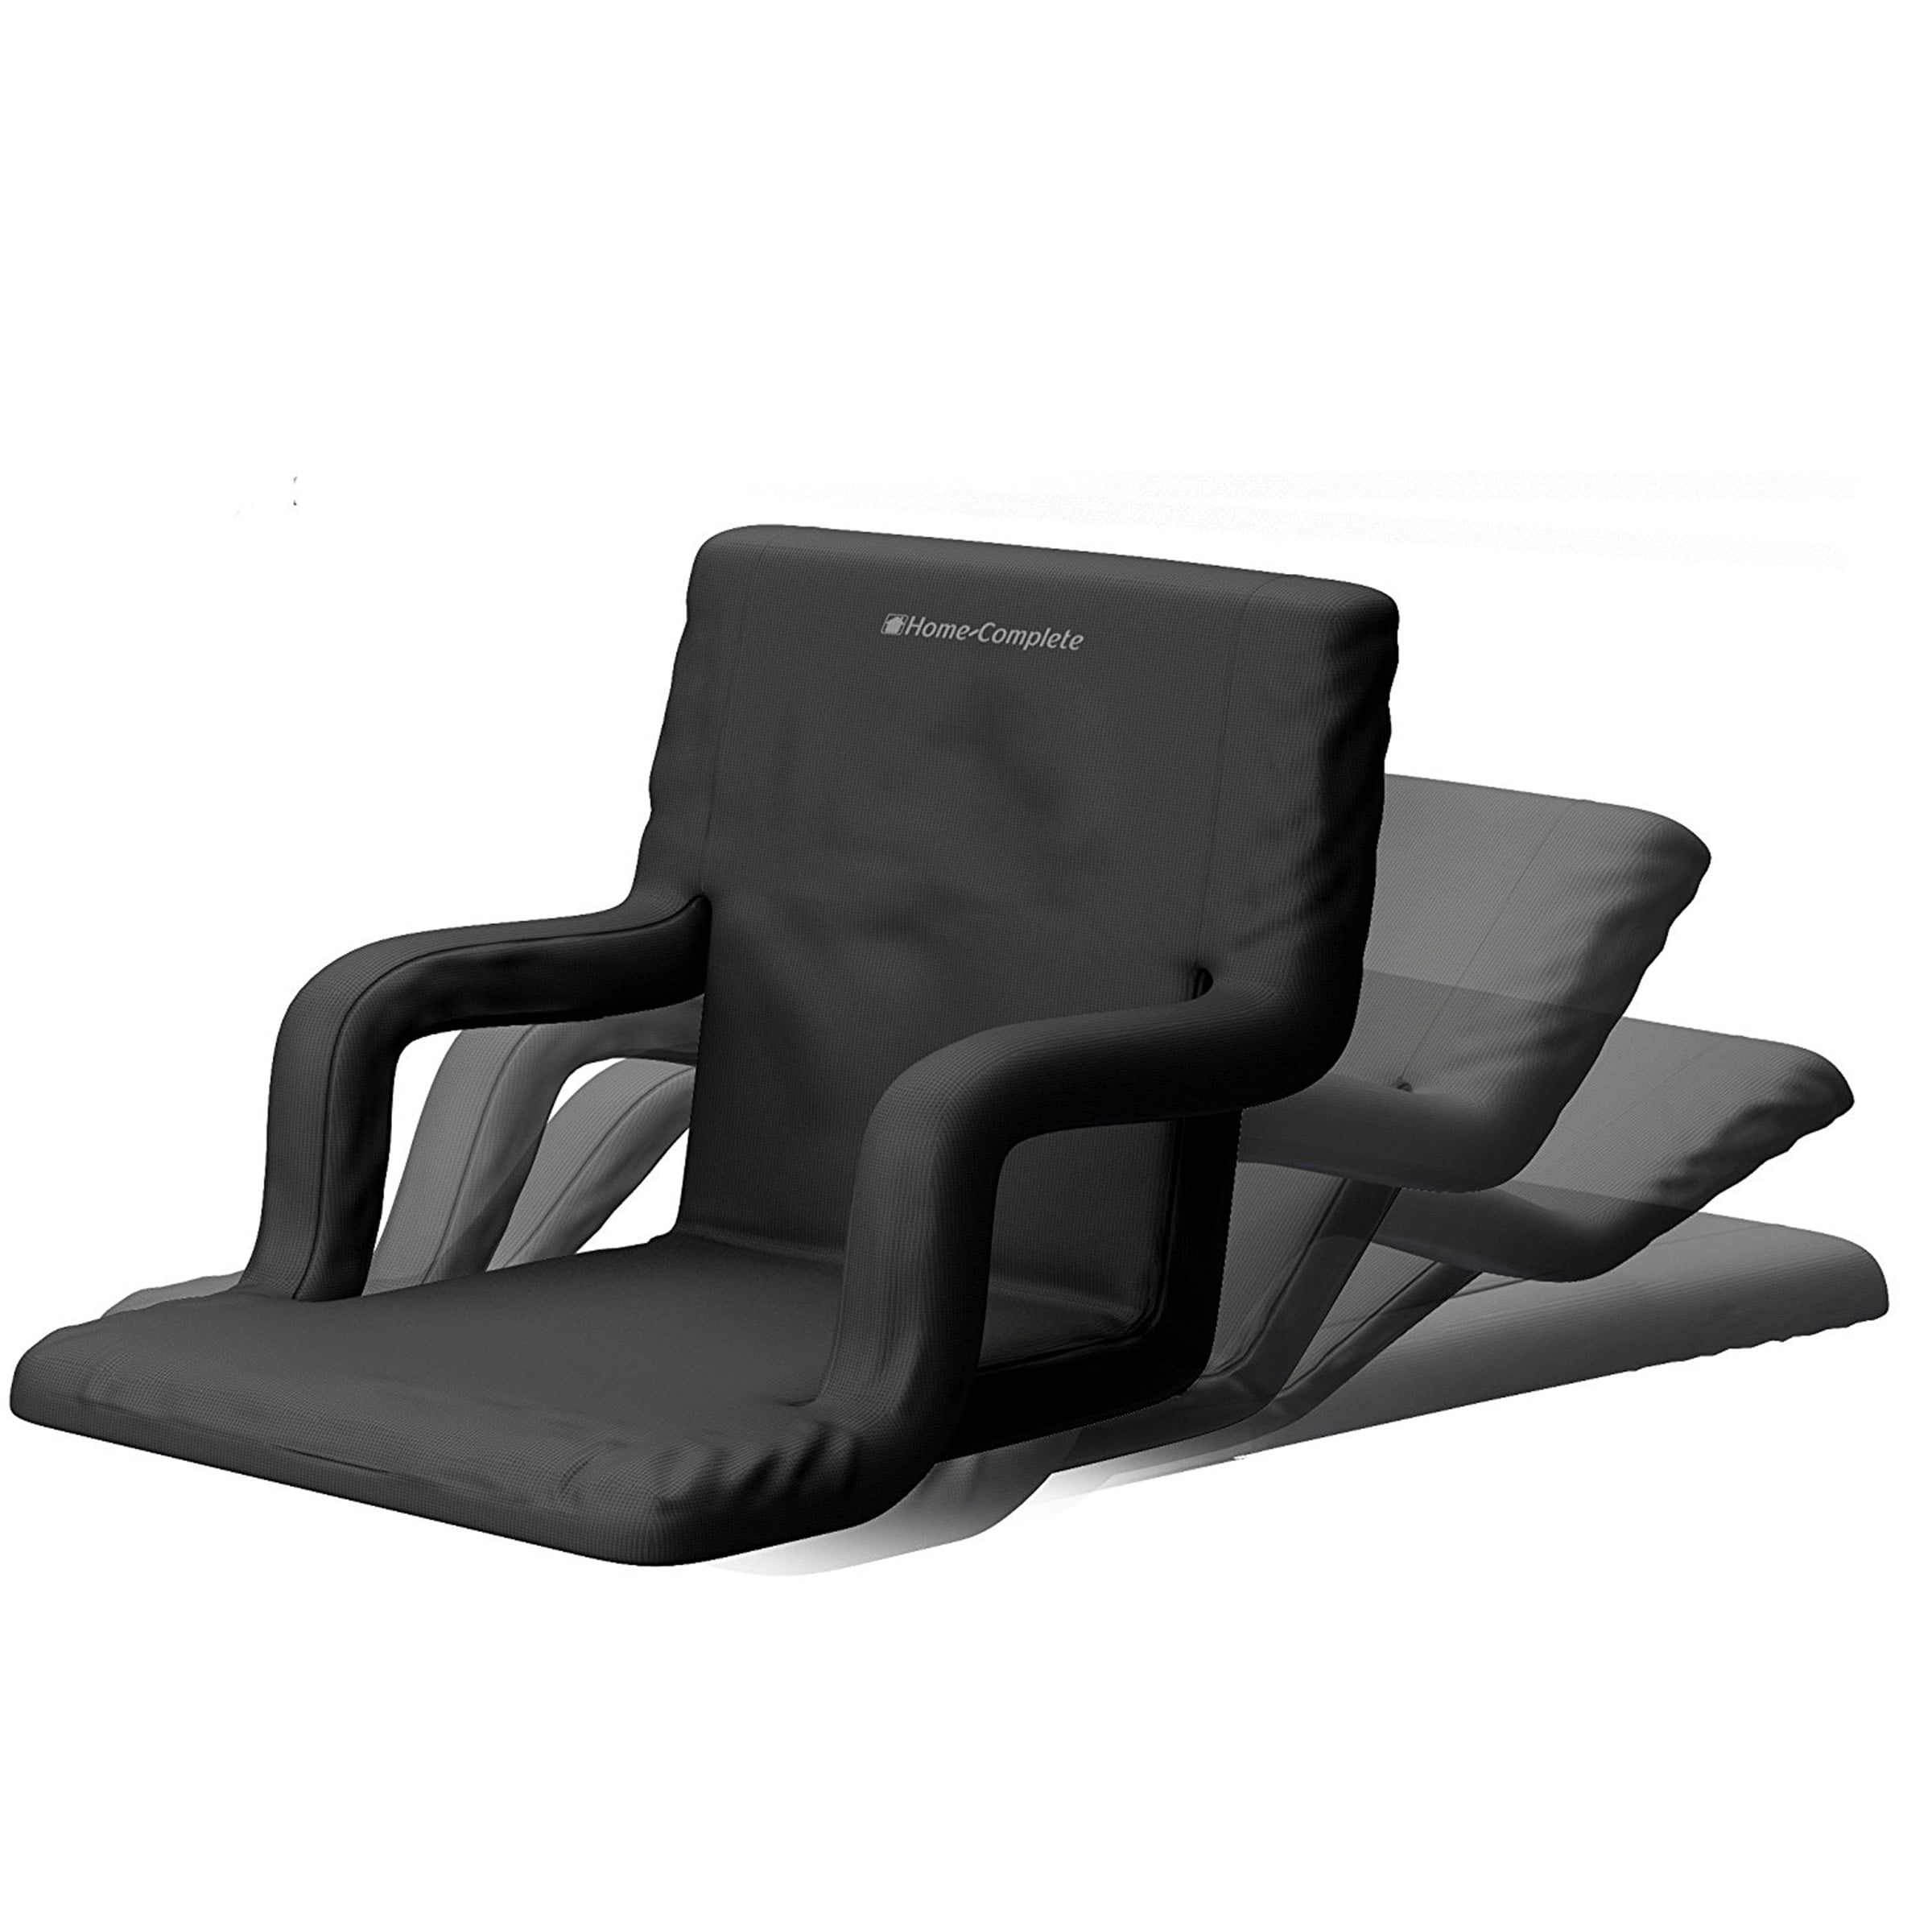 Dropship Stadium Seating For Bleachers, Heated Bleacher Seats With Backrest  Padded Cushion And Armrest For Adults And Child Portable Folding Extra Wide  Football Stadium Chairs With Back Support to Sell Online at